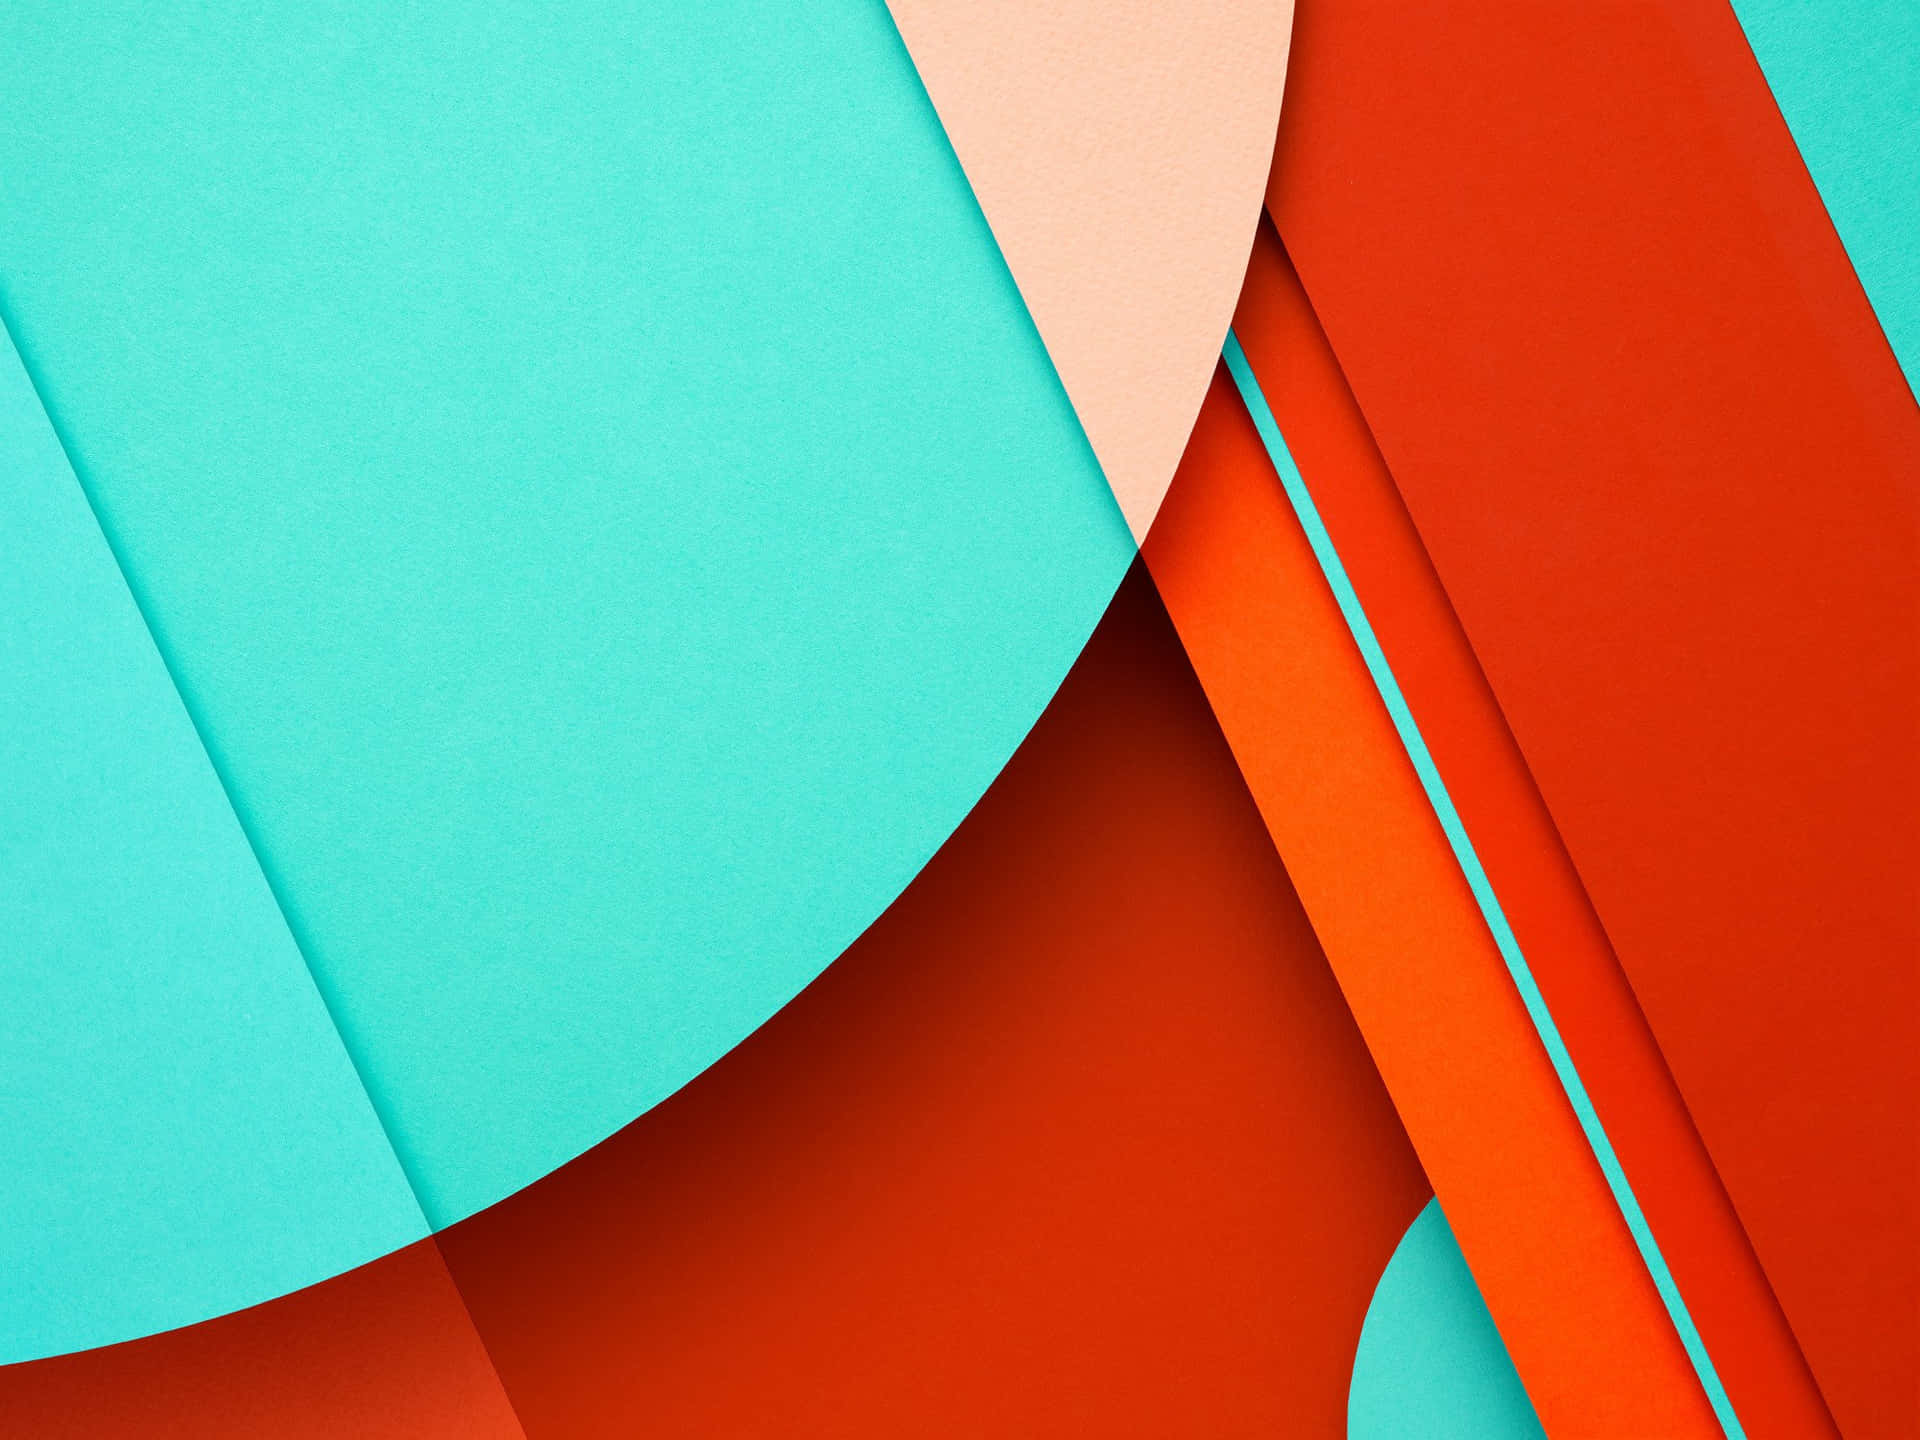 Google Material Design Concept Showcasing Colorful Layers That Change As You Navigate Around. Background